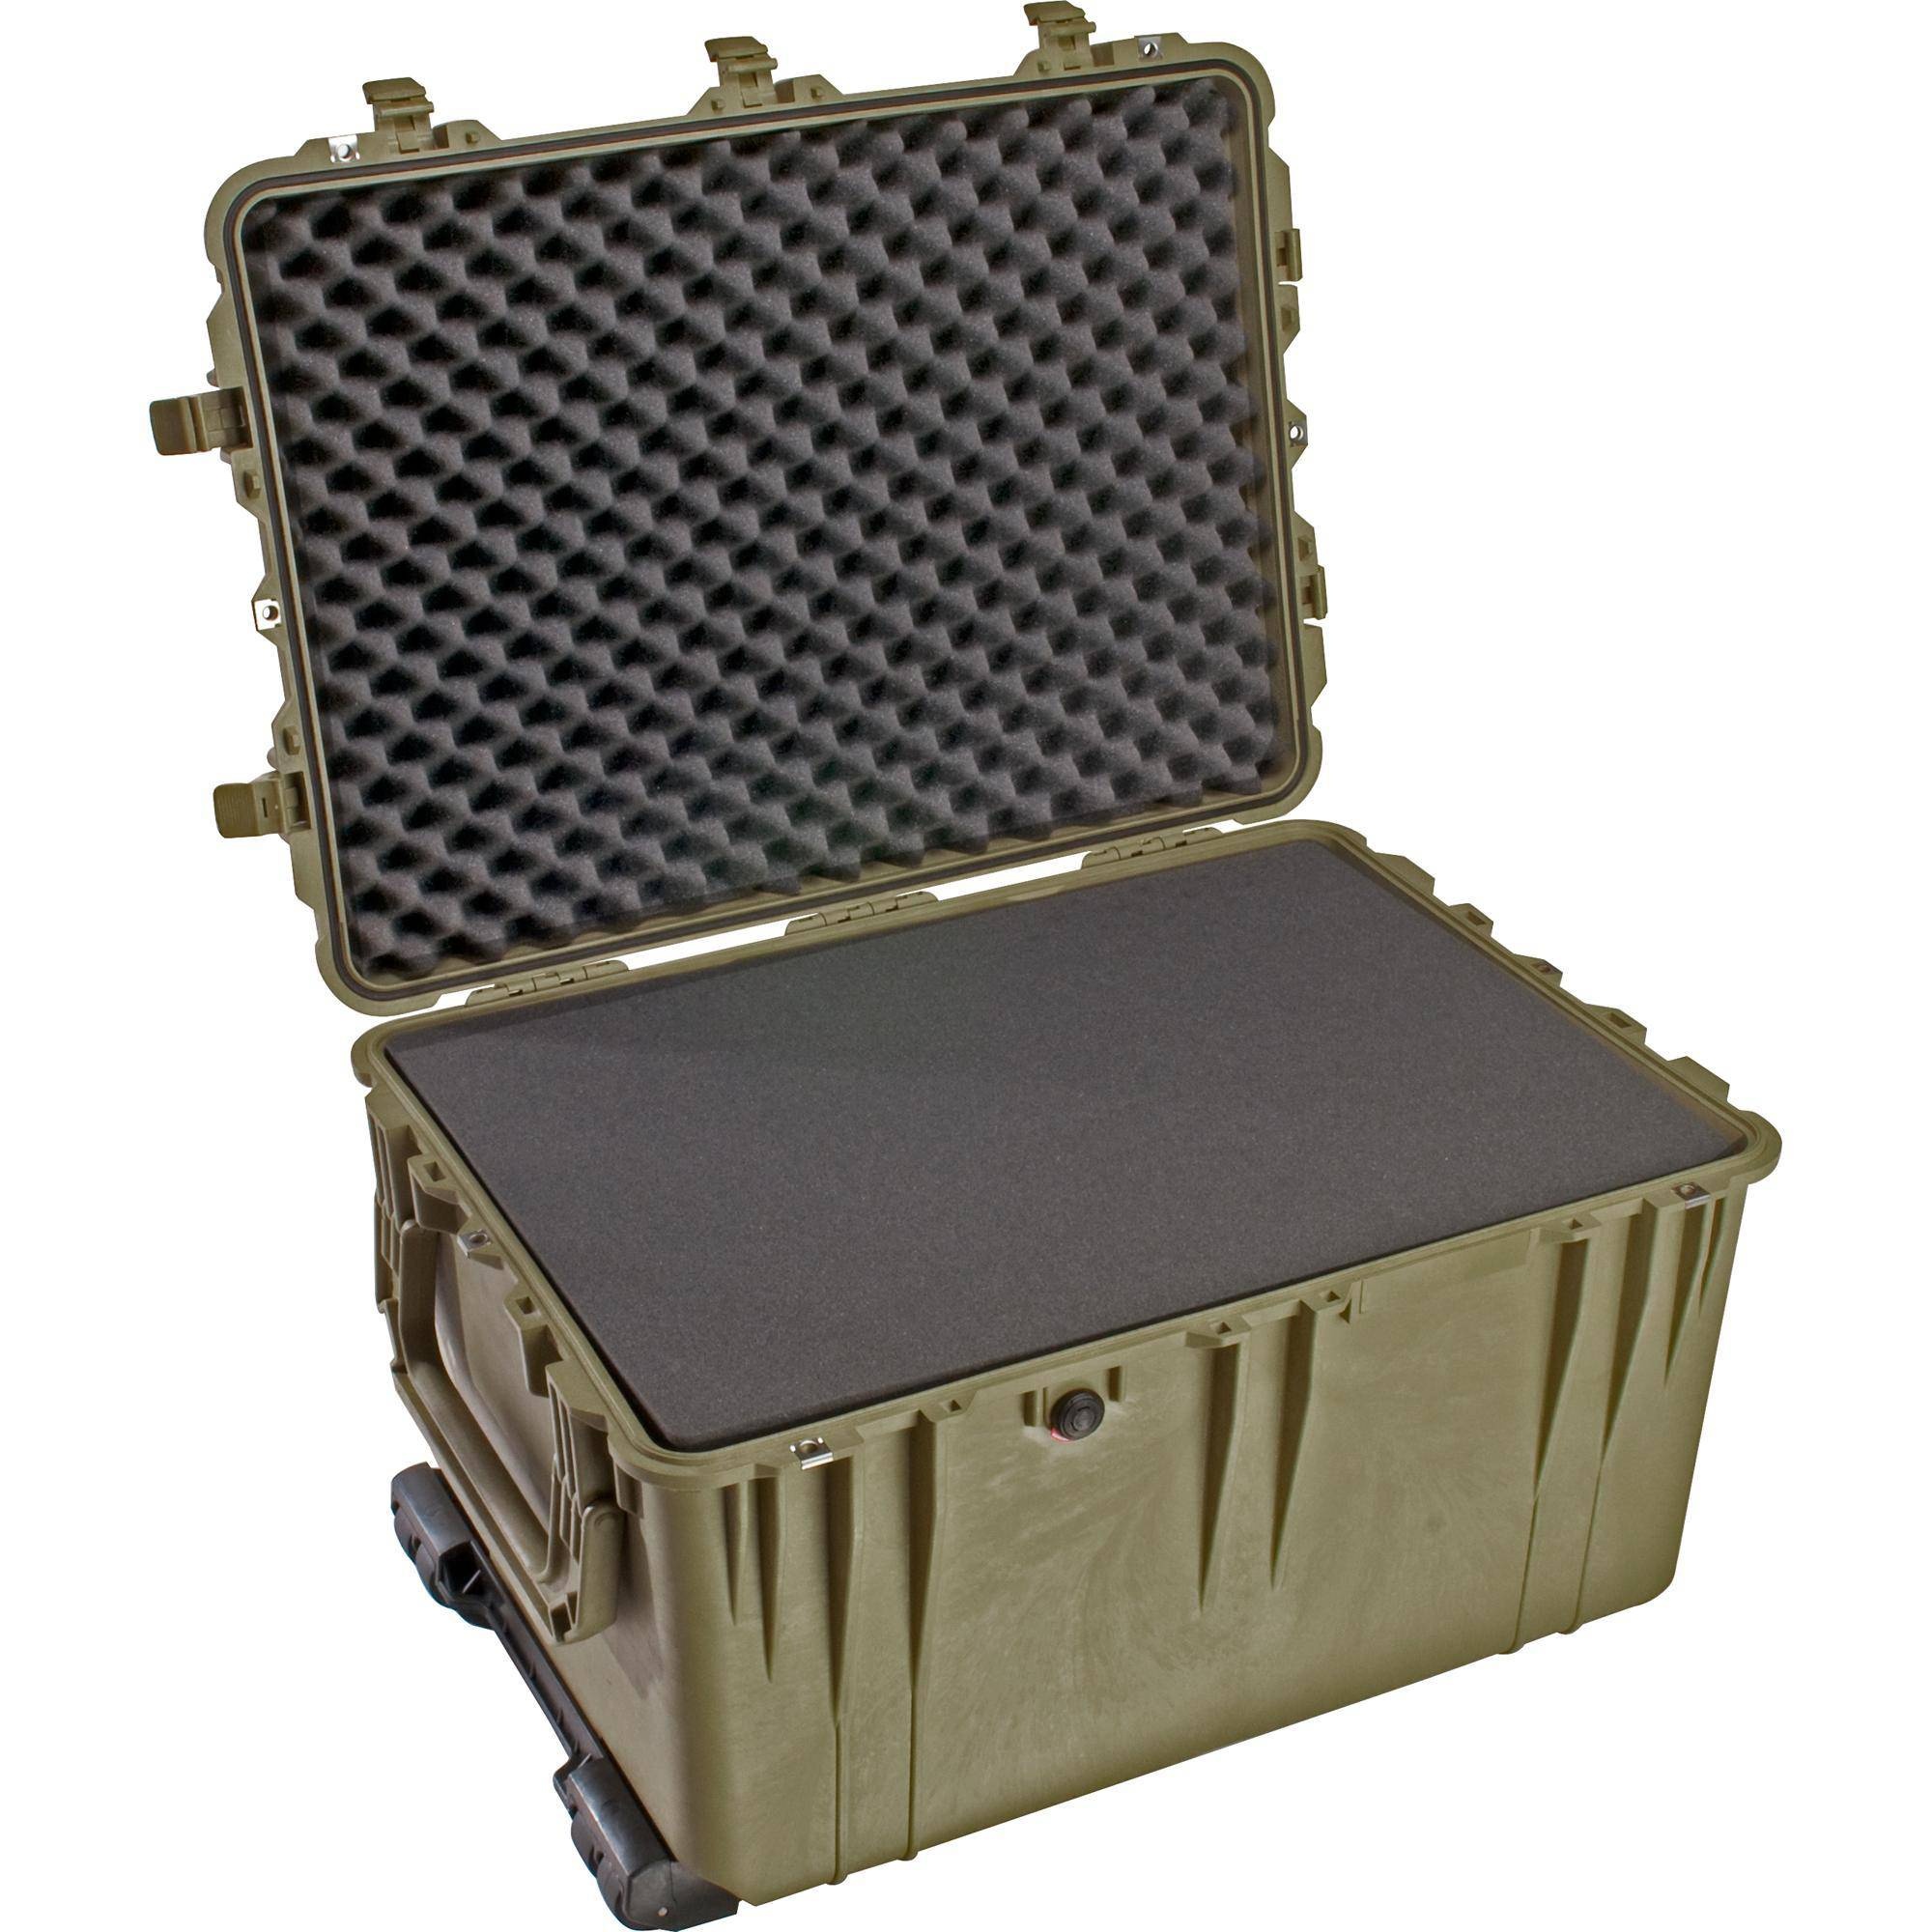 Pelican 1660 Case (Olive Drab Green)